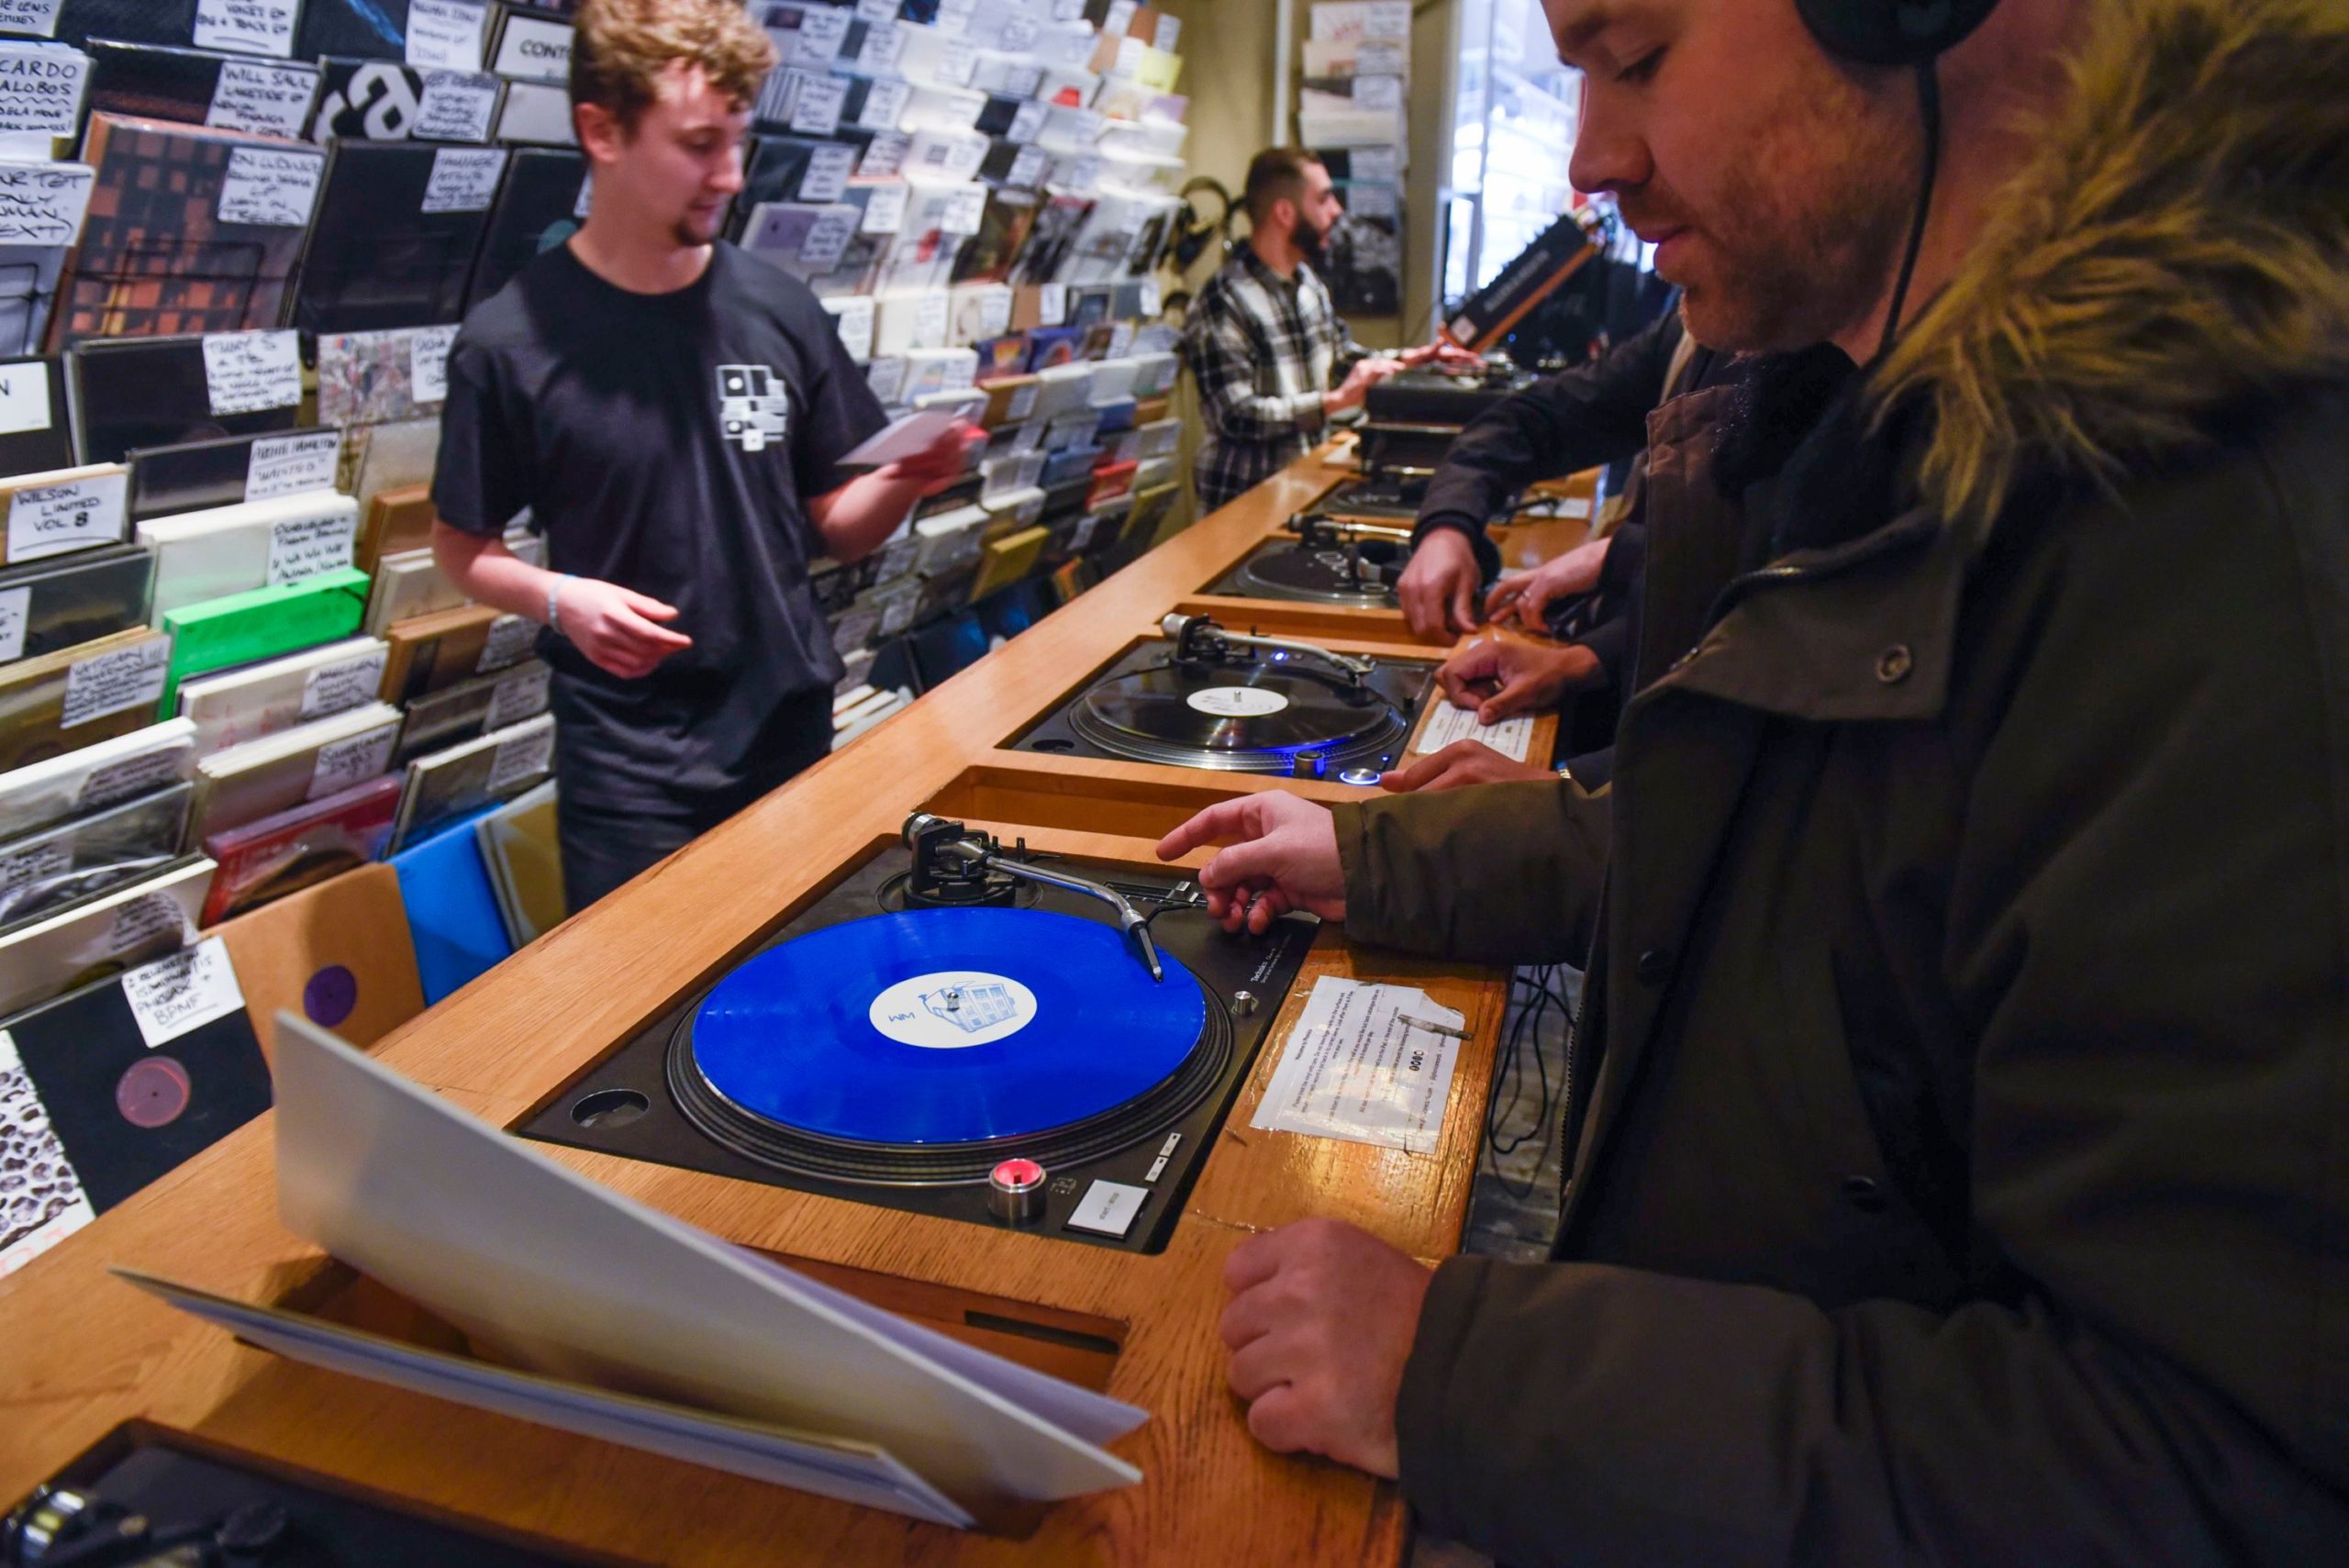 Photo by Stephen Chung/LNP/Shutterstock (10203276c)
Customers listen to LPs in Phonica Records. Analogue music fans visit independent record shops in Soho to celebrate vinyl music on the 12th Record Store Day.
Record store day, London, UK - 13 Apr 2019
Over 200 independent record shops across the UK come together annually to celebrate the unique culture of analogue music with special vinyl releases made exclusively for the day. In 2018, sales of vinyl rose for the 11th consecutive year to 4.2 million units according to the British Phonographic Industry (BPI).